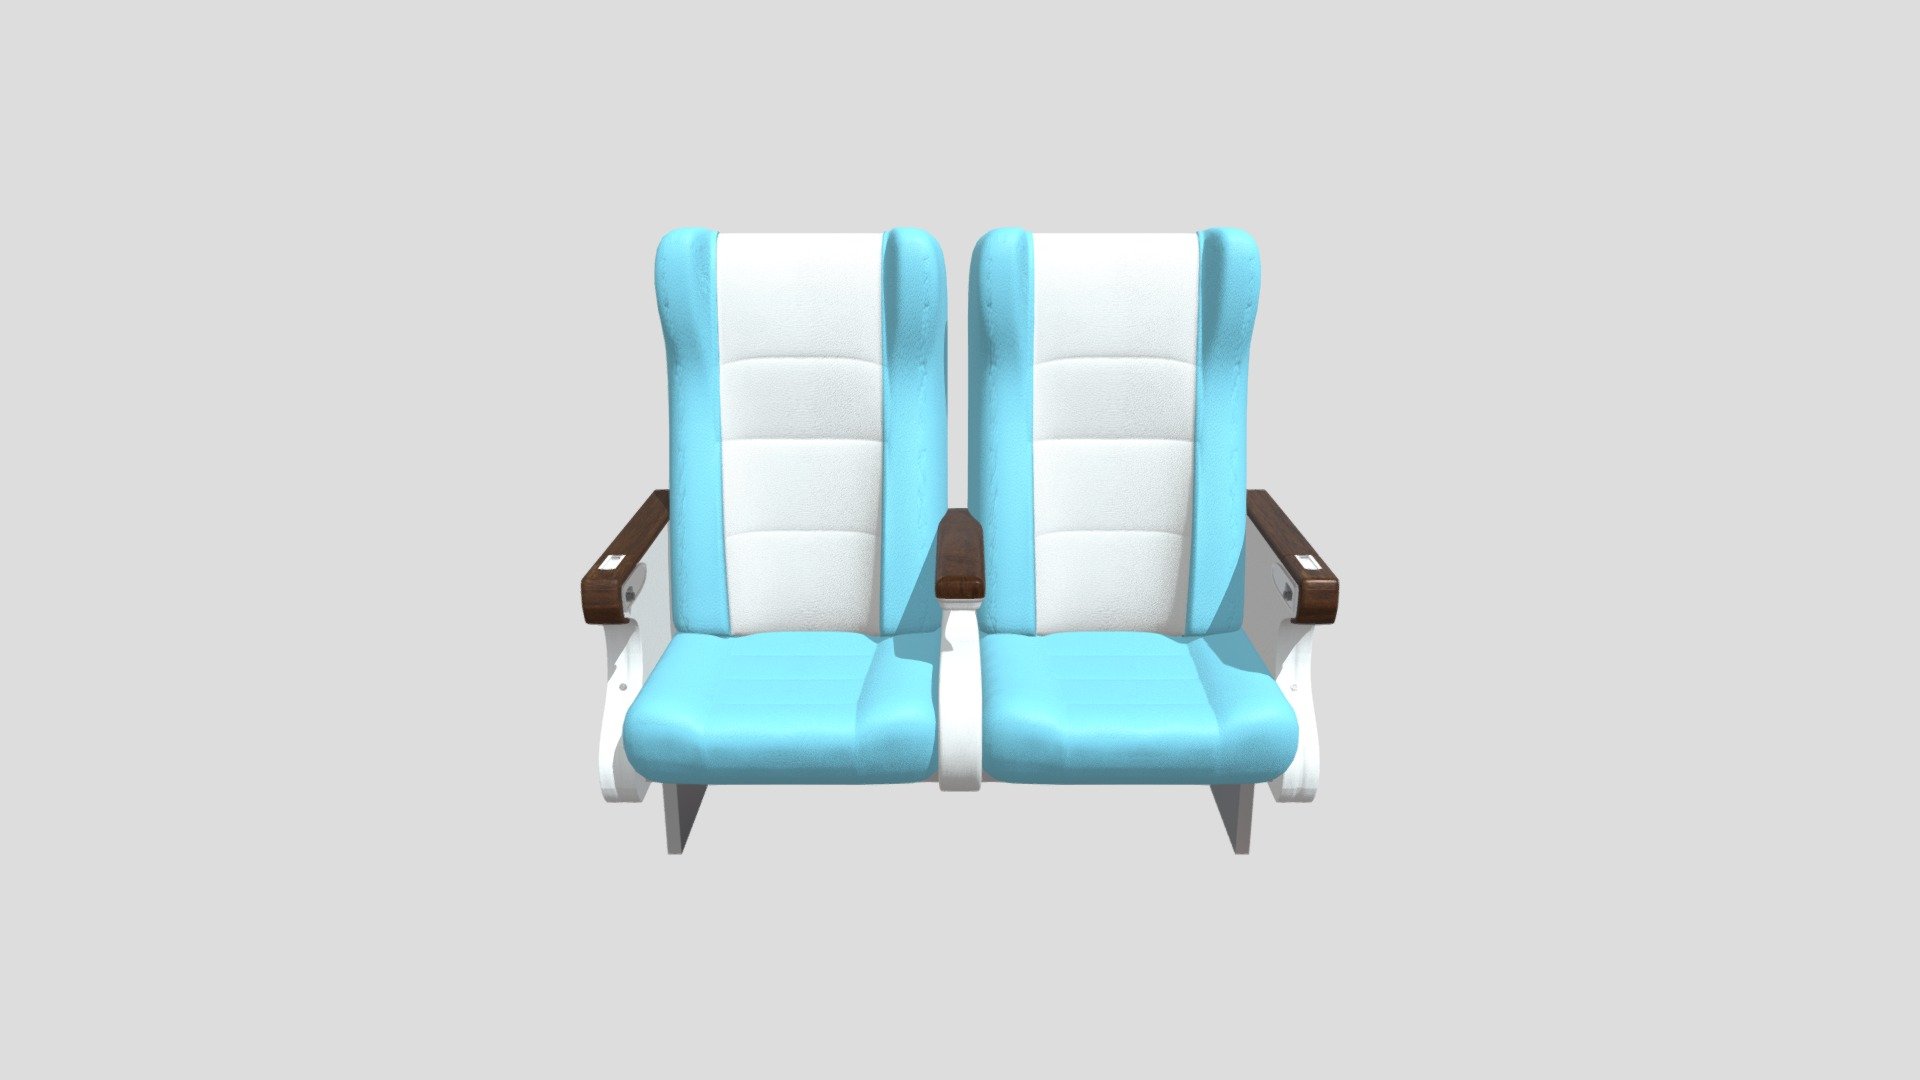 seat for train

Follow my profile :

instagram.com/kang.amil - executive seat - Download Free 3D model by amiliogarcia 3d model